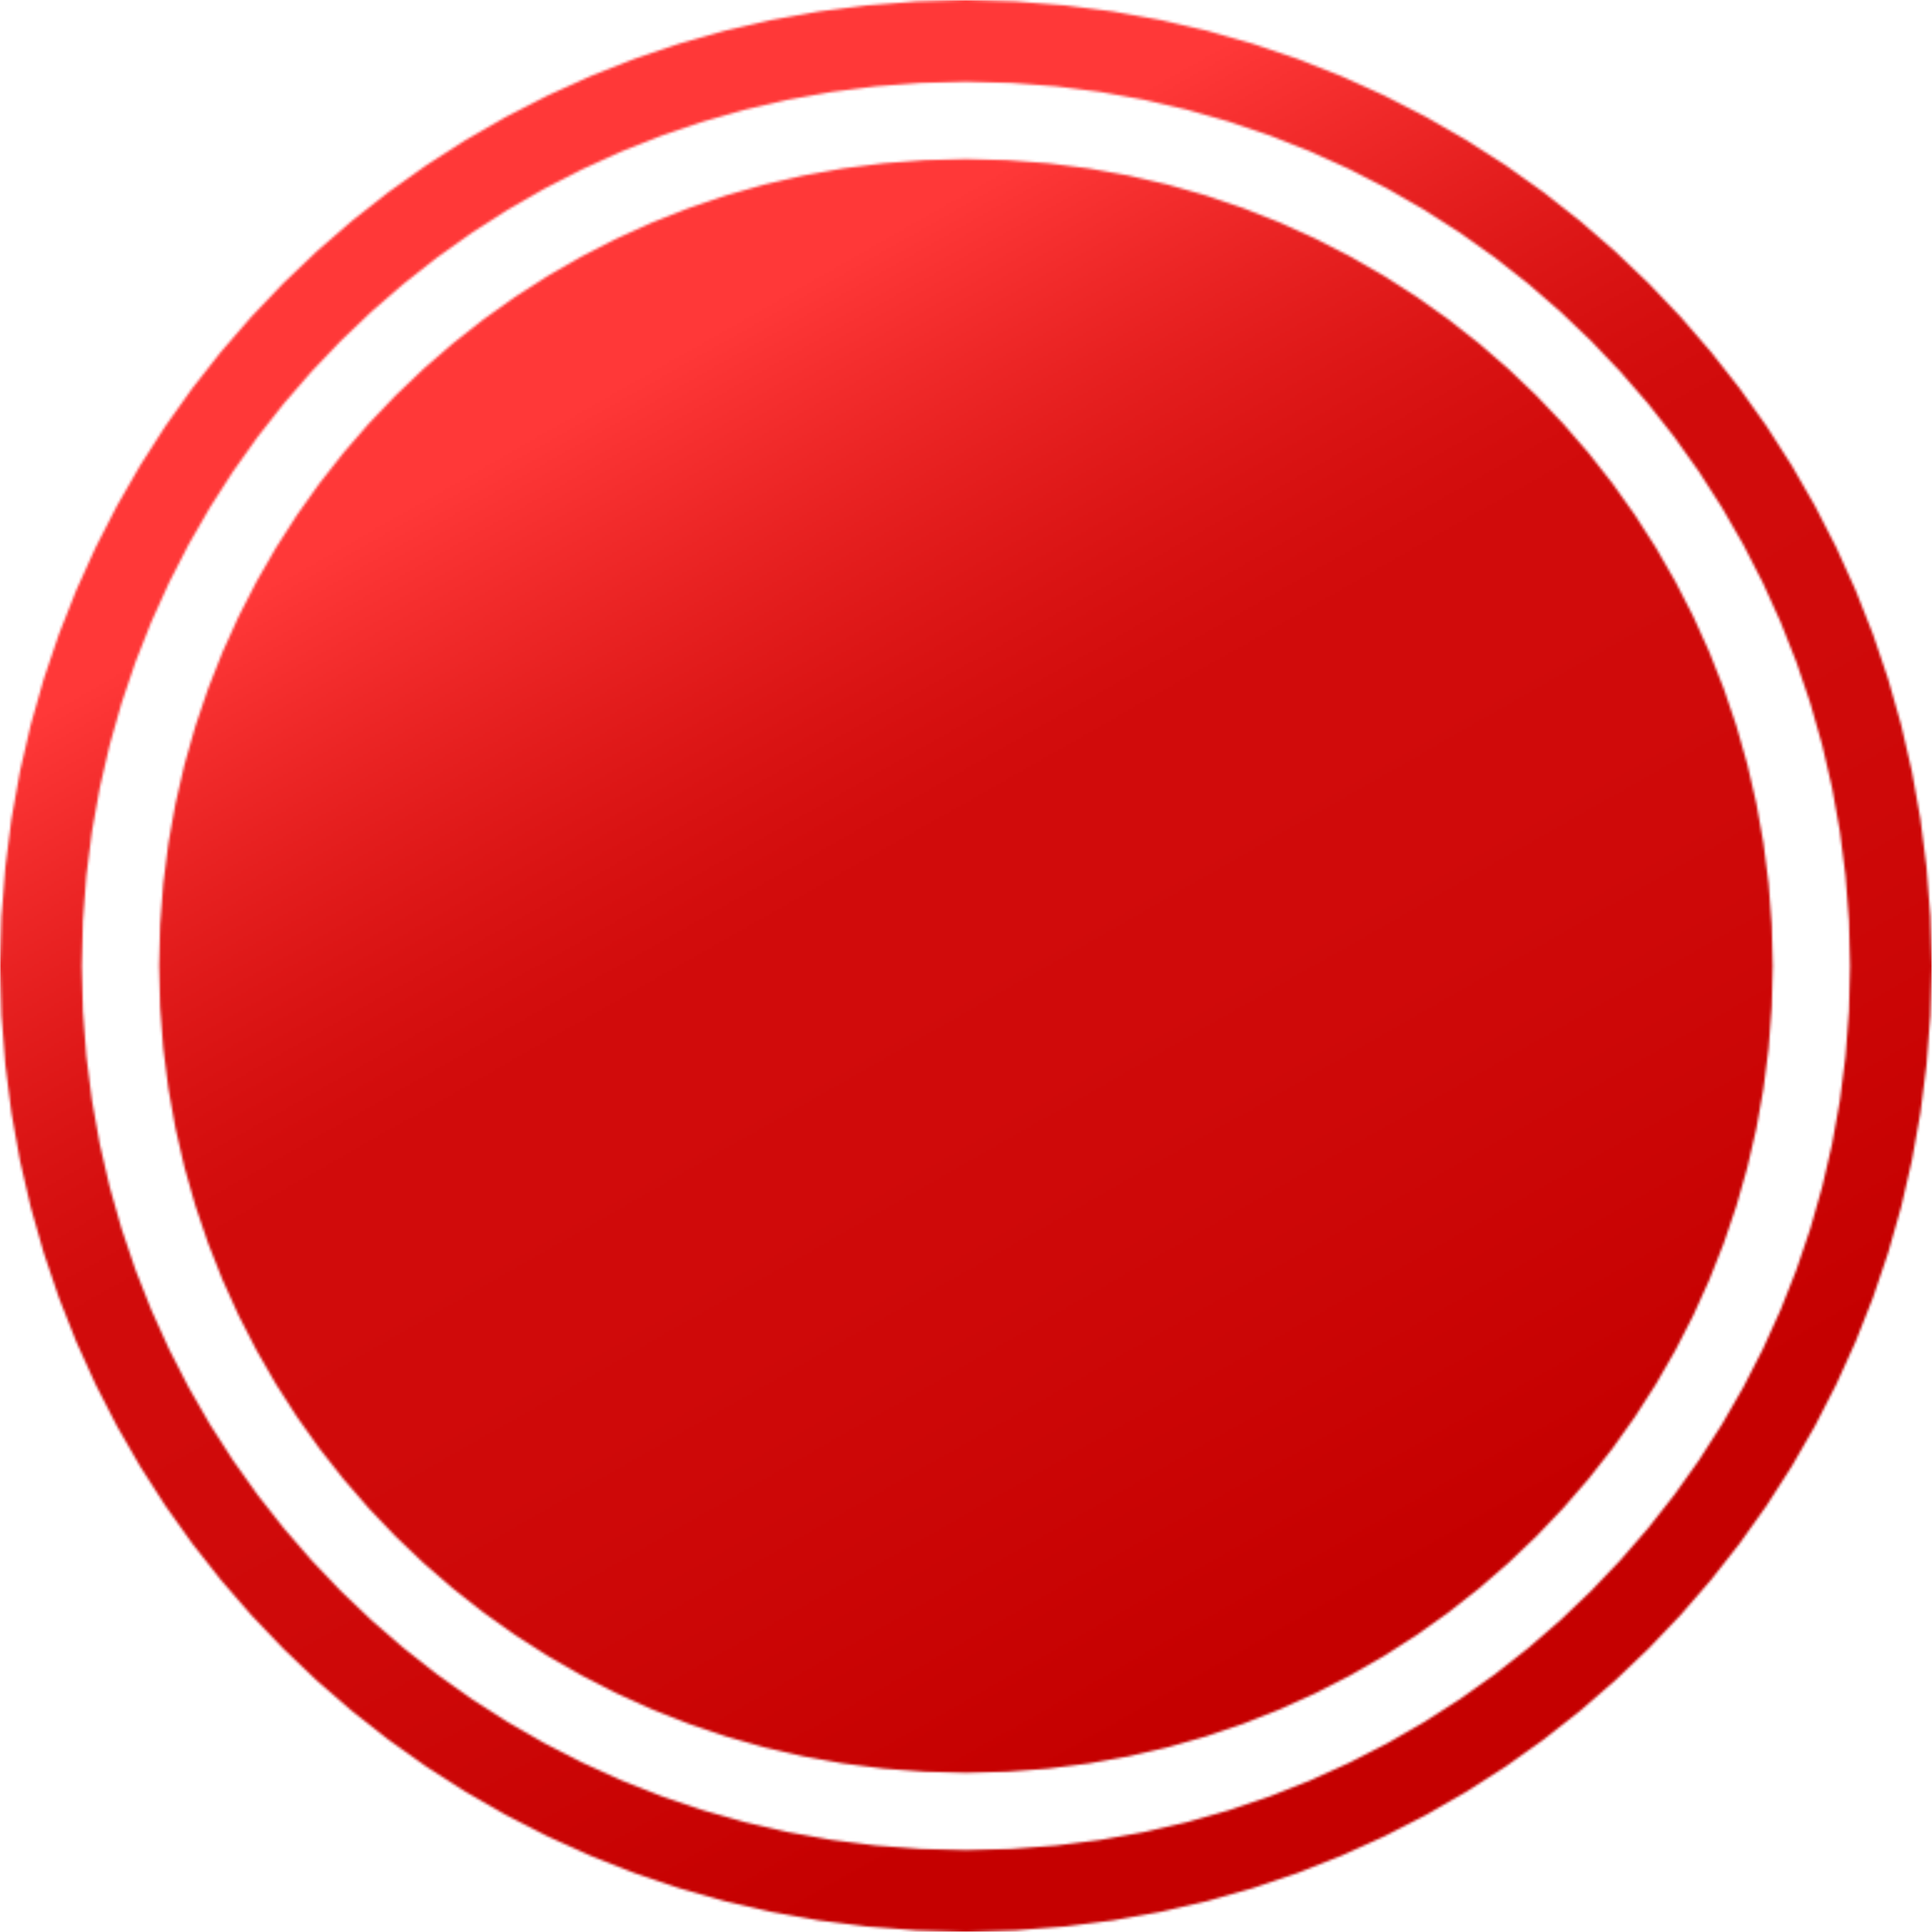 red button png image